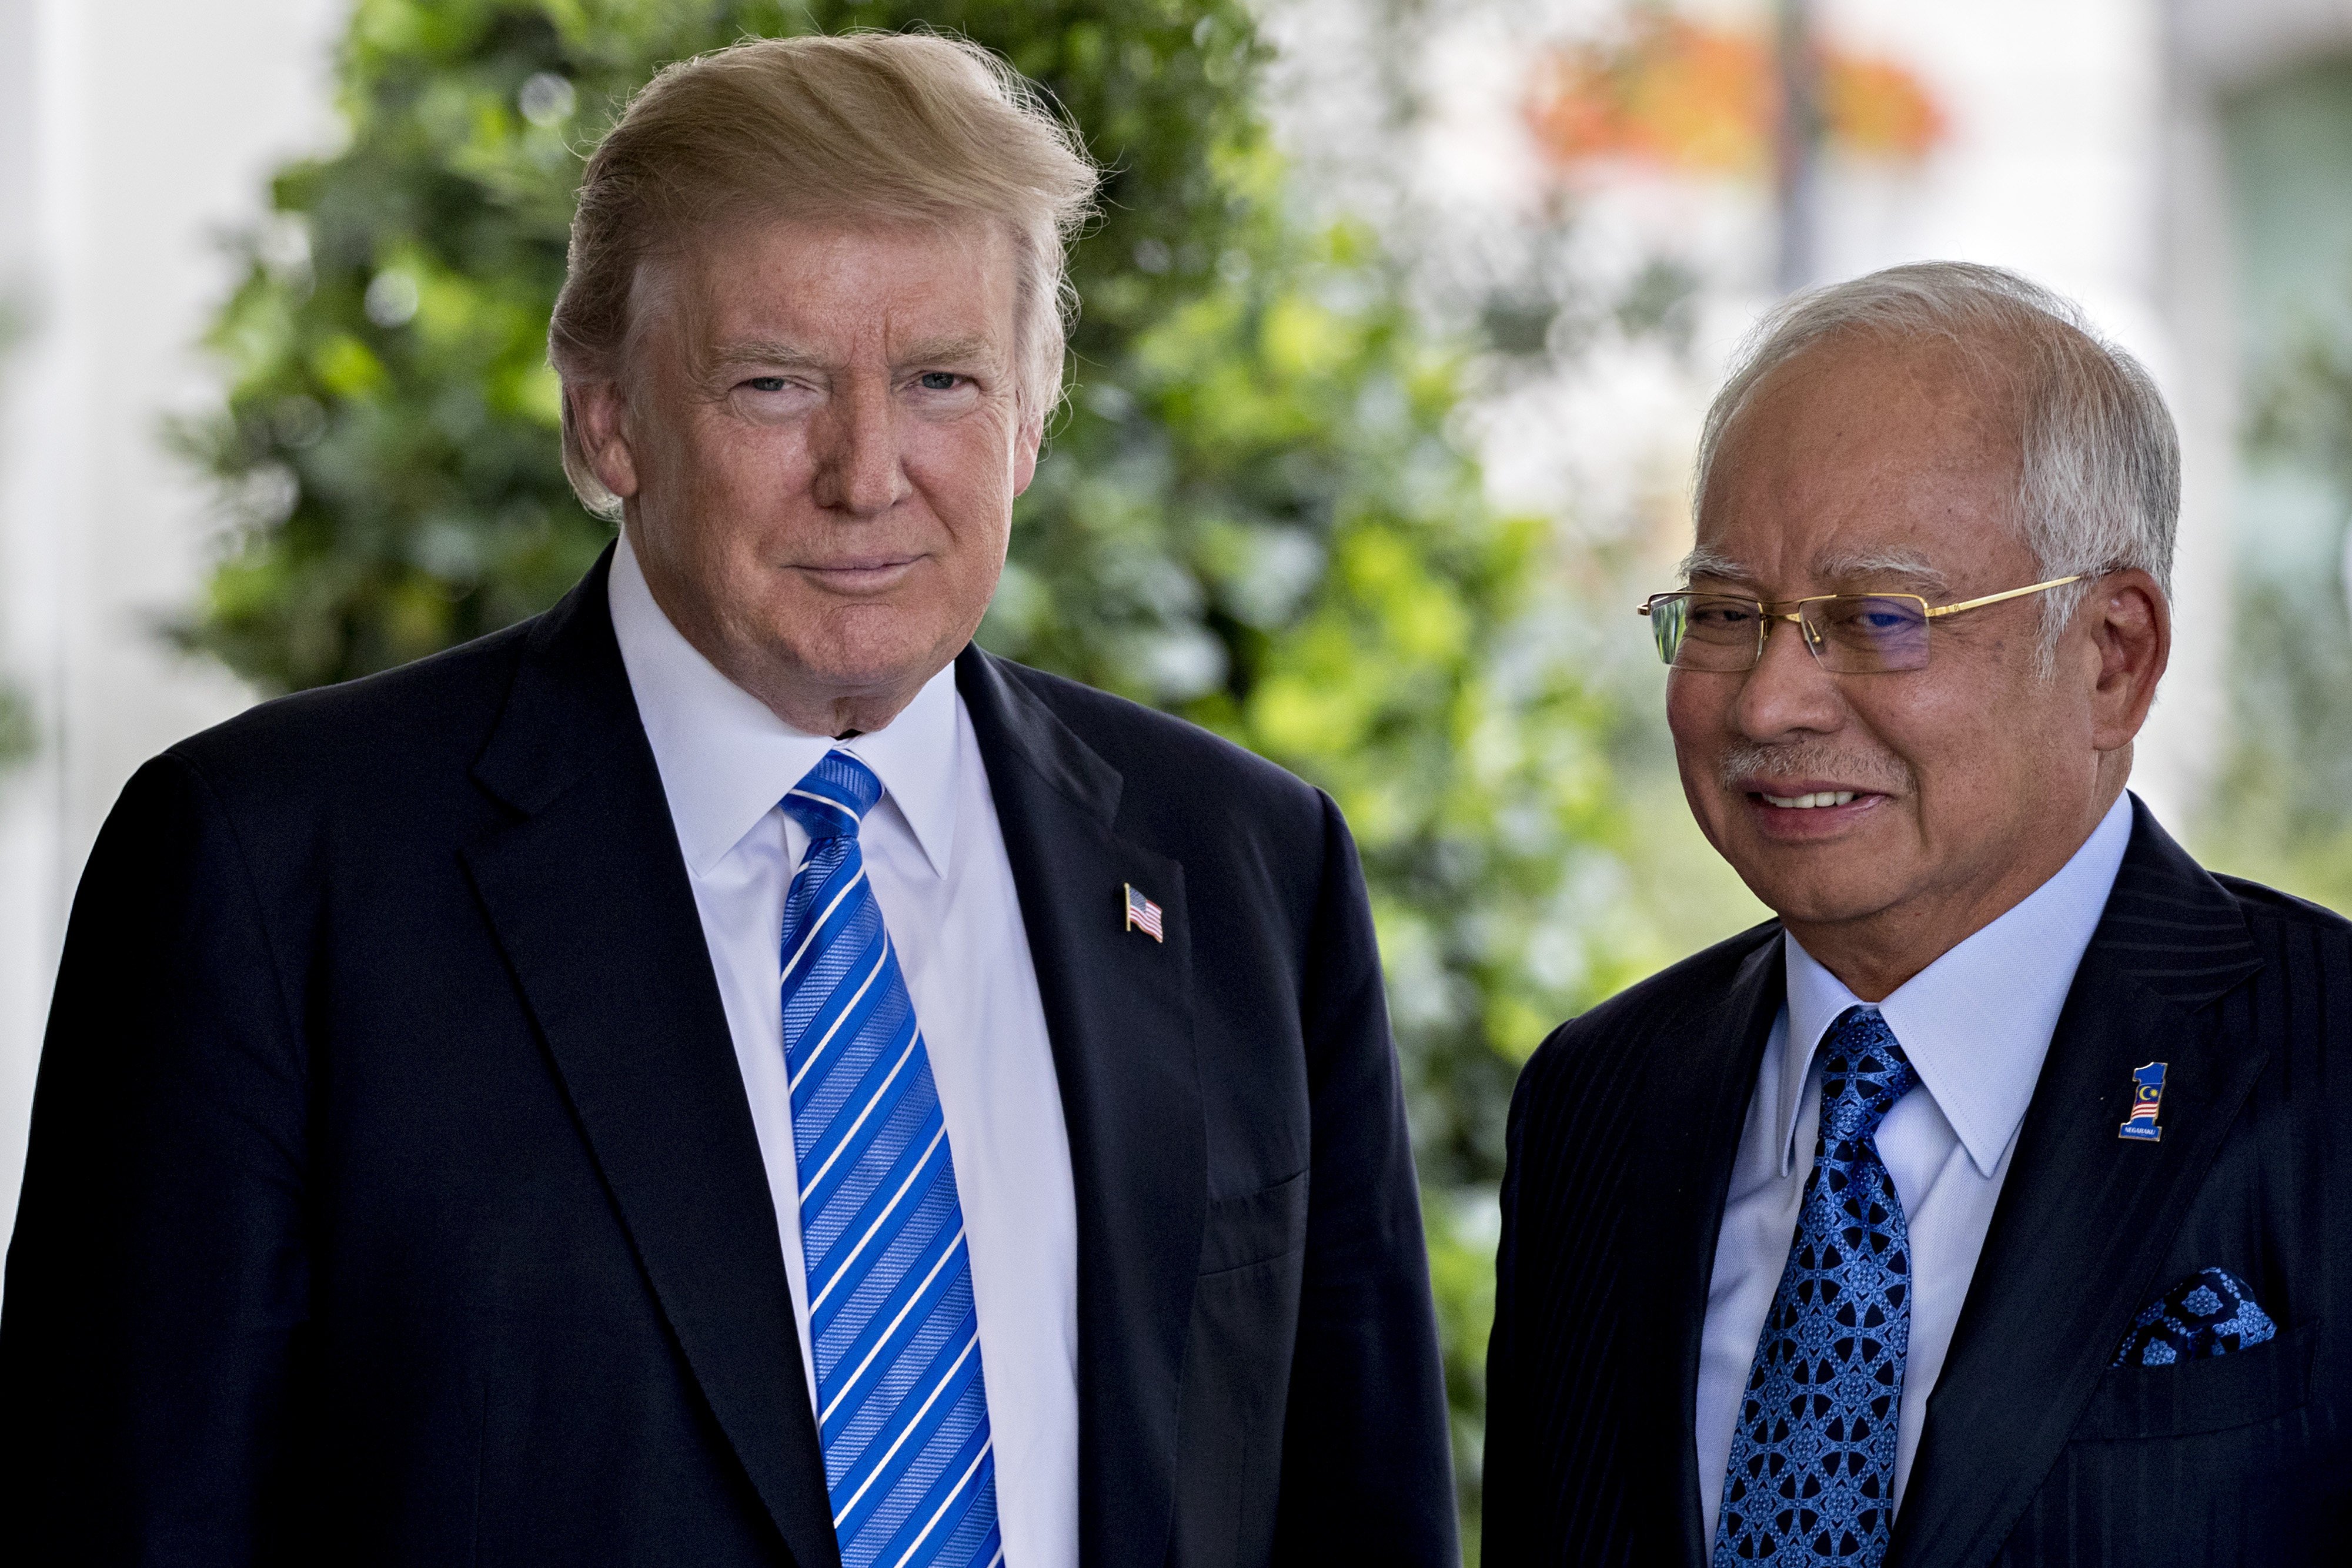 (From left) US President Donald Trump and Malaysia’s Prime Minister Najib Razak at the West Wing of the White House in Washington on September 12, 2017. Photo: Bloomberg